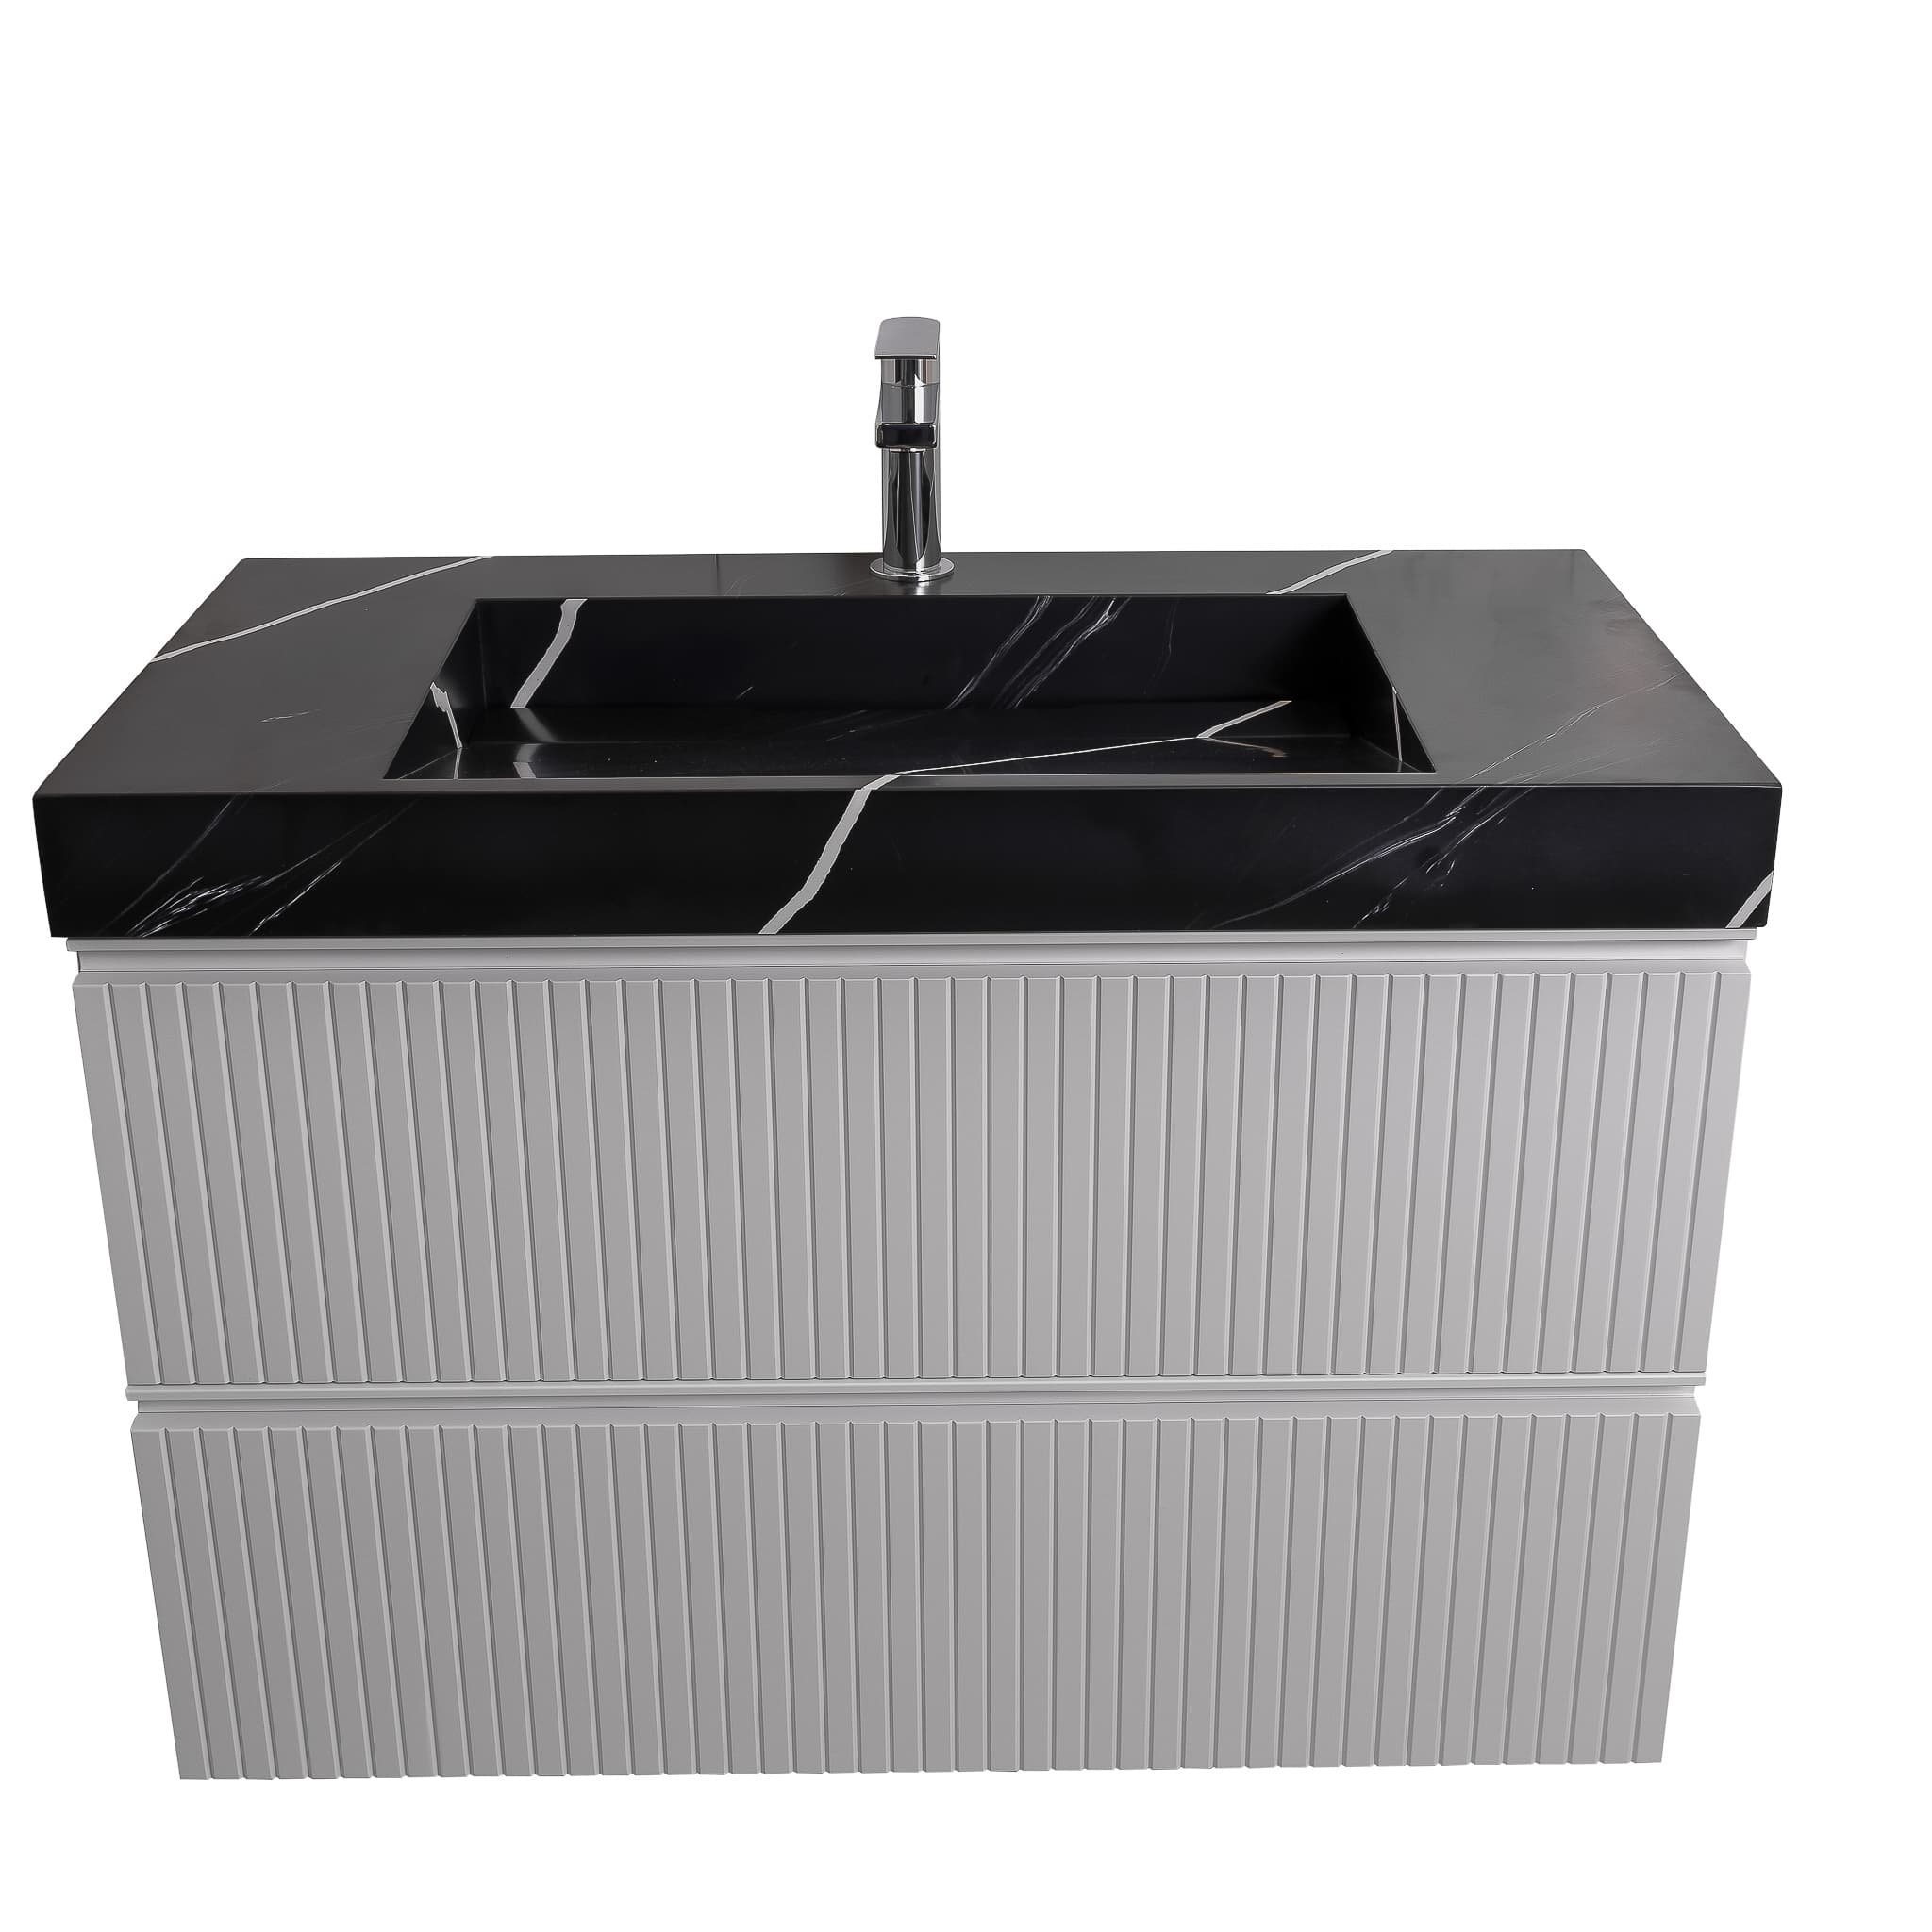 Ares 35.5 Matte White Cabinet, Solid Surface Matte Black Carrara Infinity Sink, Wall Mounted Modern Vanity Set